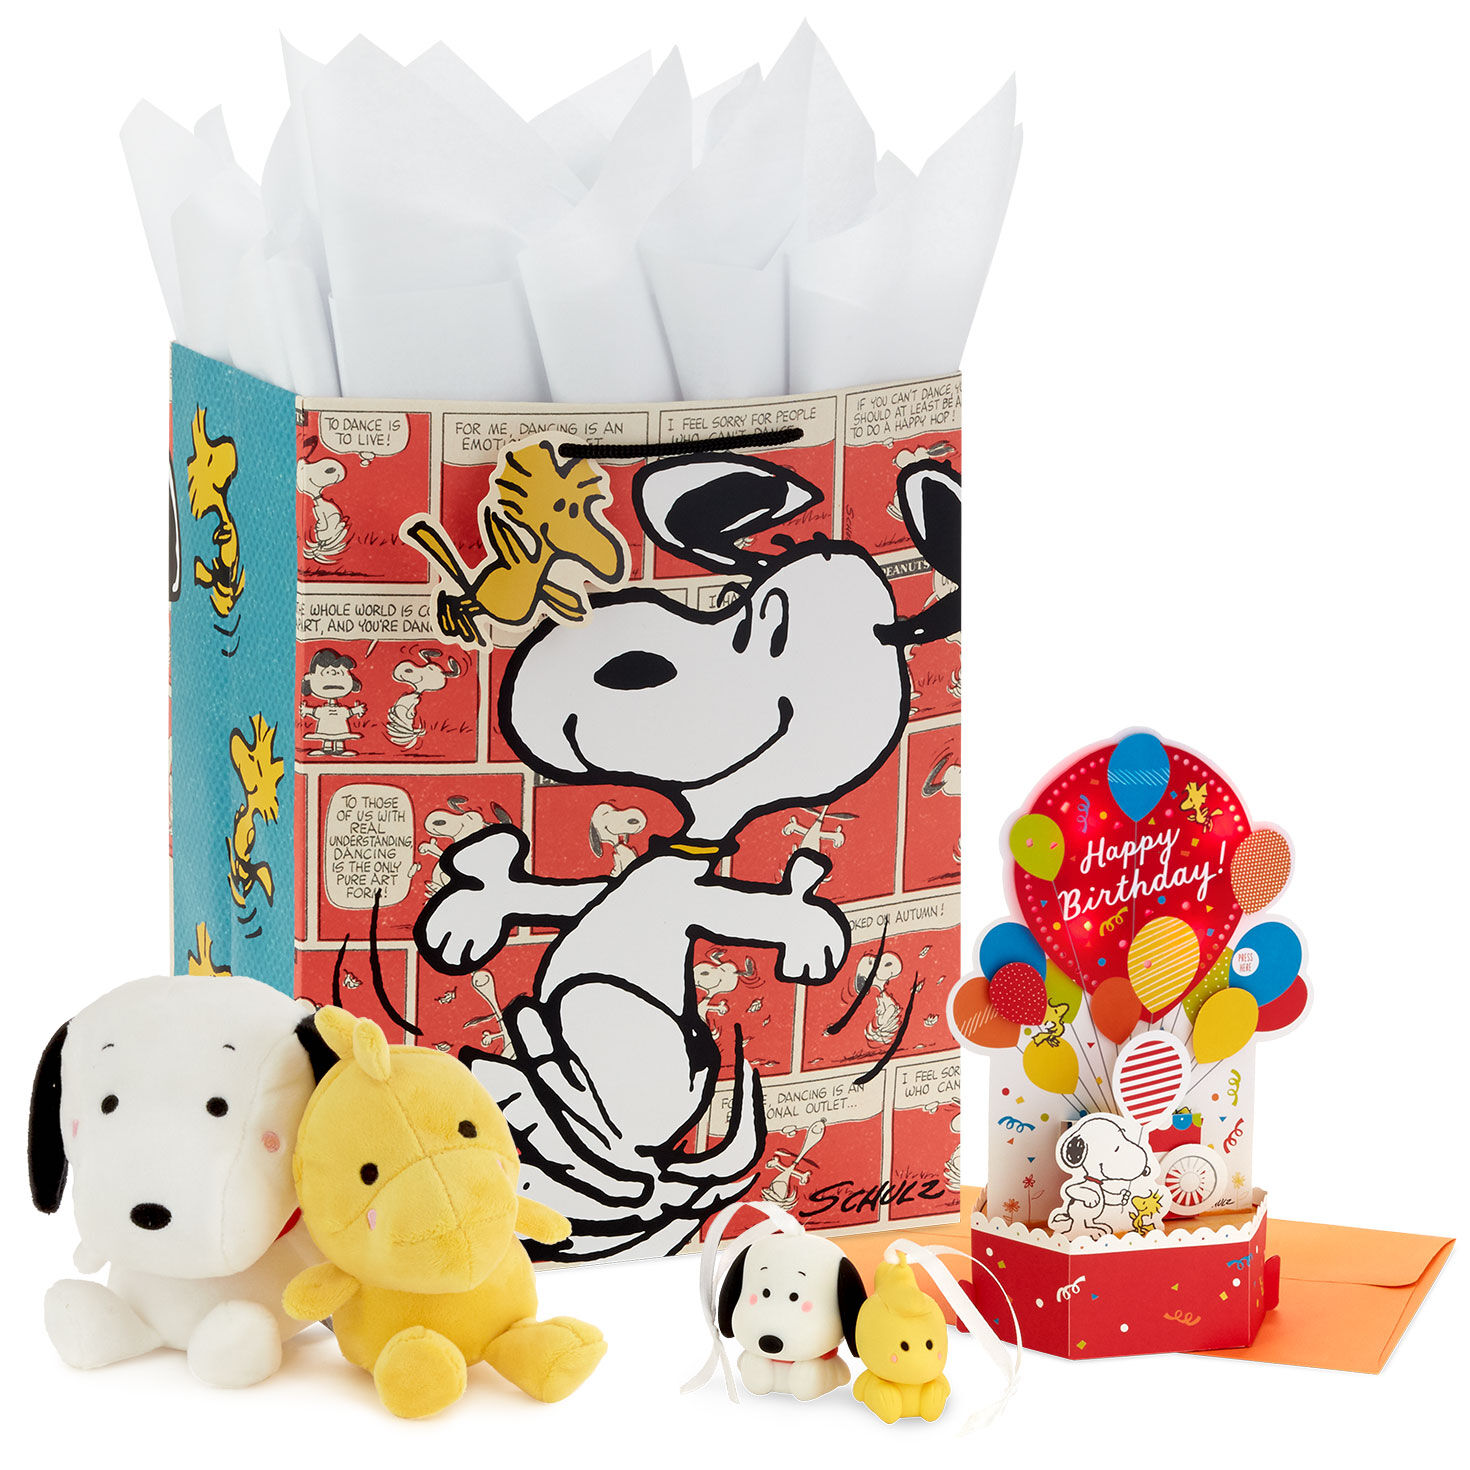 Peanuts® Snoopy and Woodstock Better Together Gift Set for only USD 5.99-22.99 | Hallmark